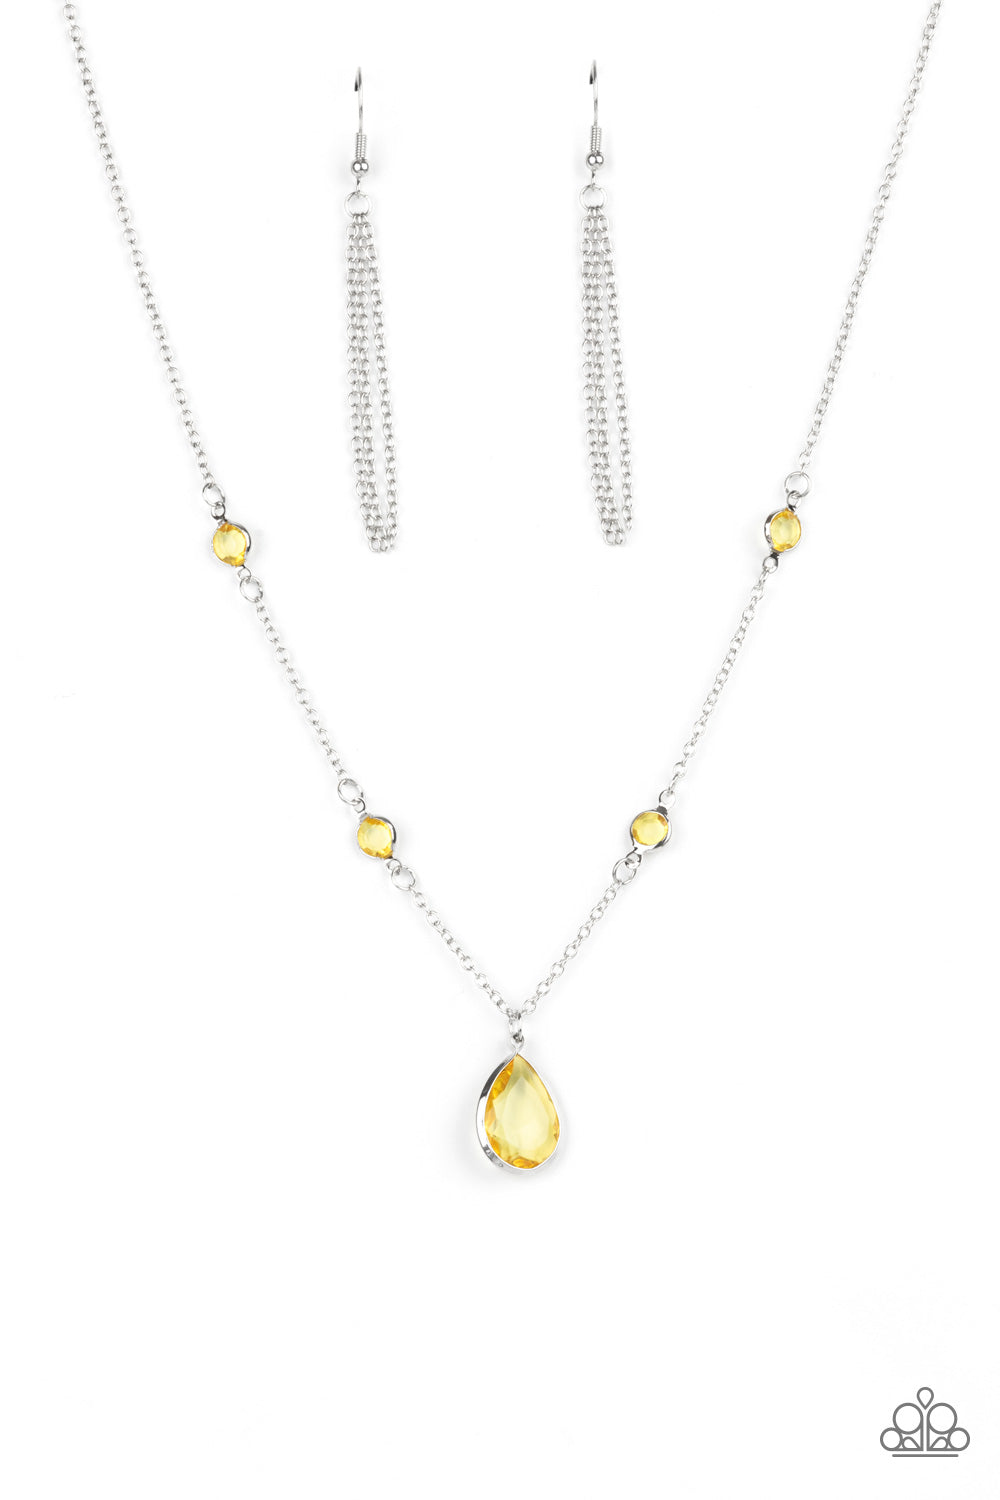 Romantic Rendezvous Necklace (Yellow, Blue, Brown)